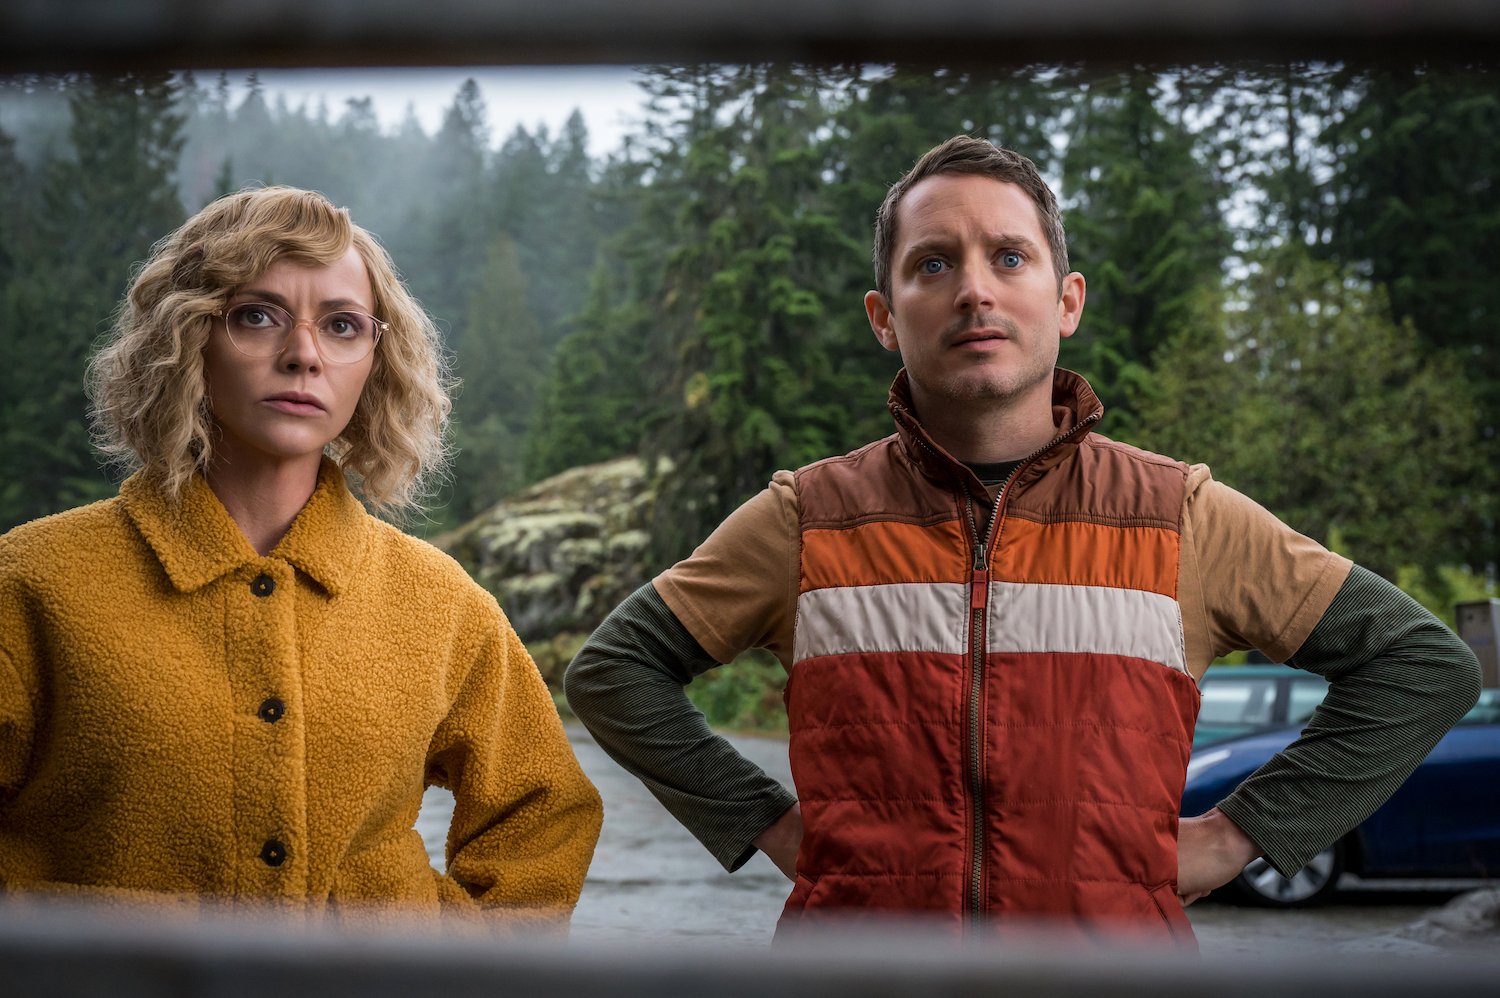 The 'Yellowjackets' Season 2 trailer featured the first glimpse of Elijah Wood, seen here standing next